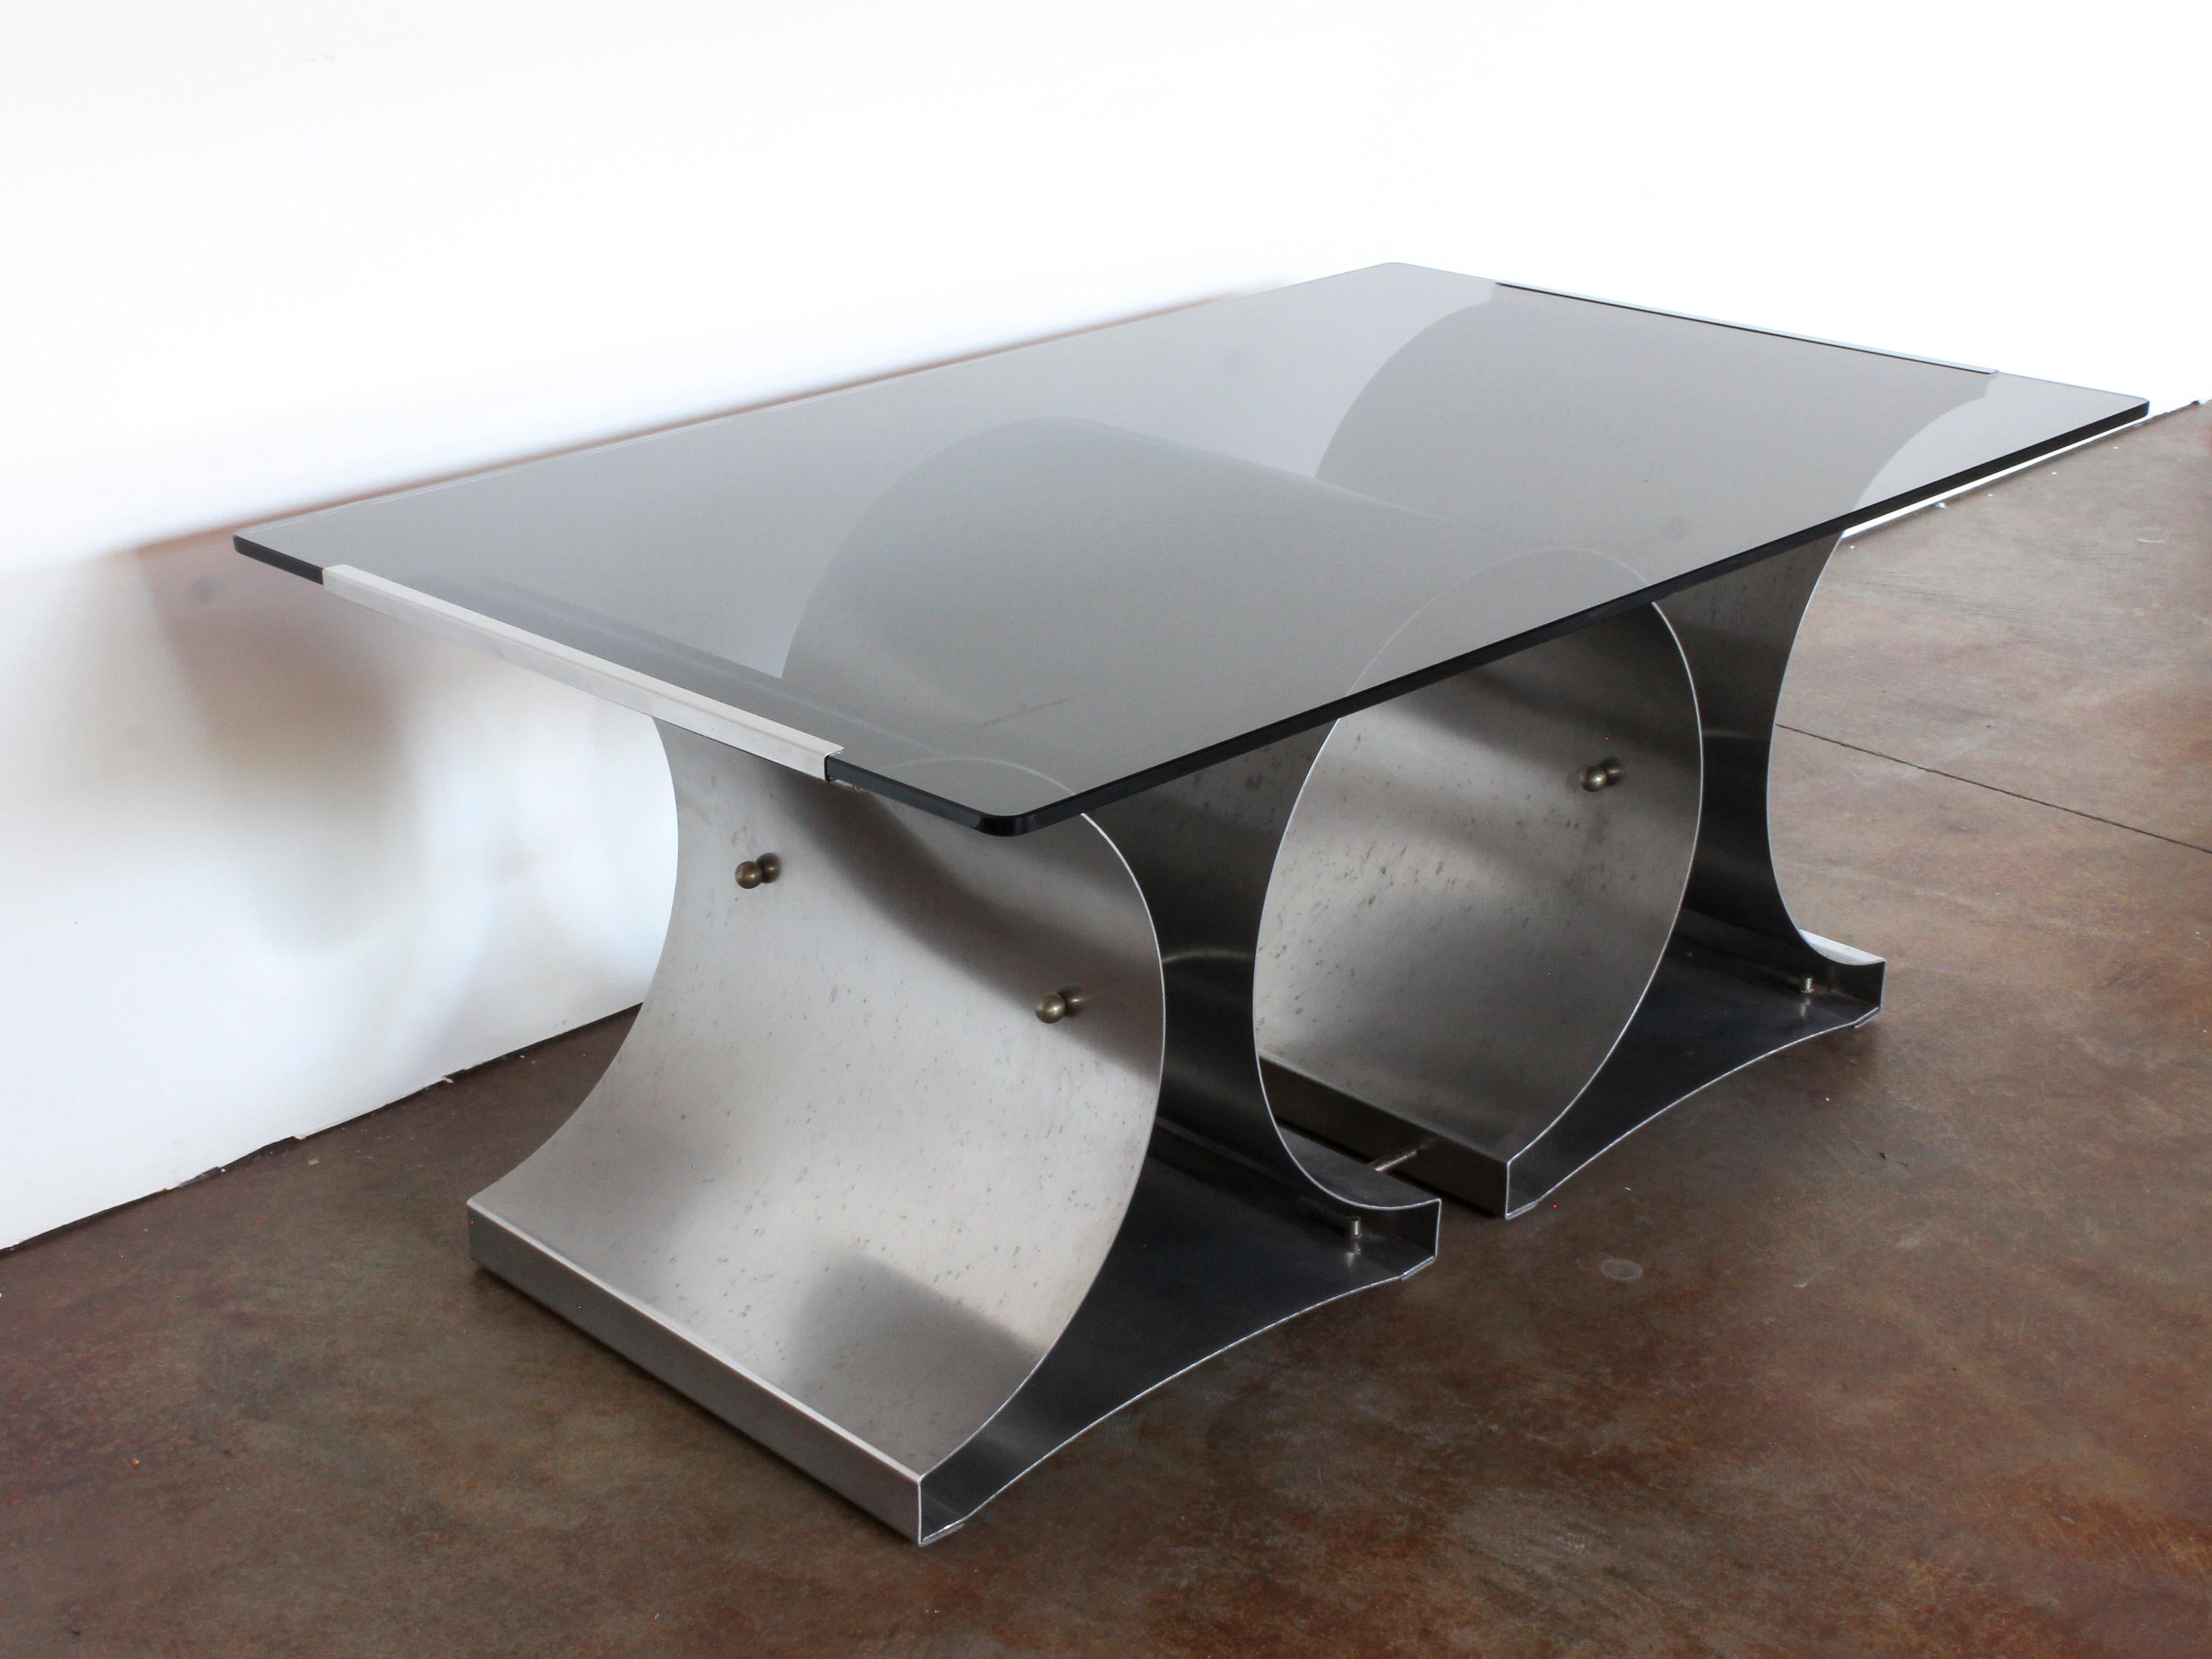 Industrial Steel and Glass Coffee Table by Francois Monnet for Kappa, French, c. 1970